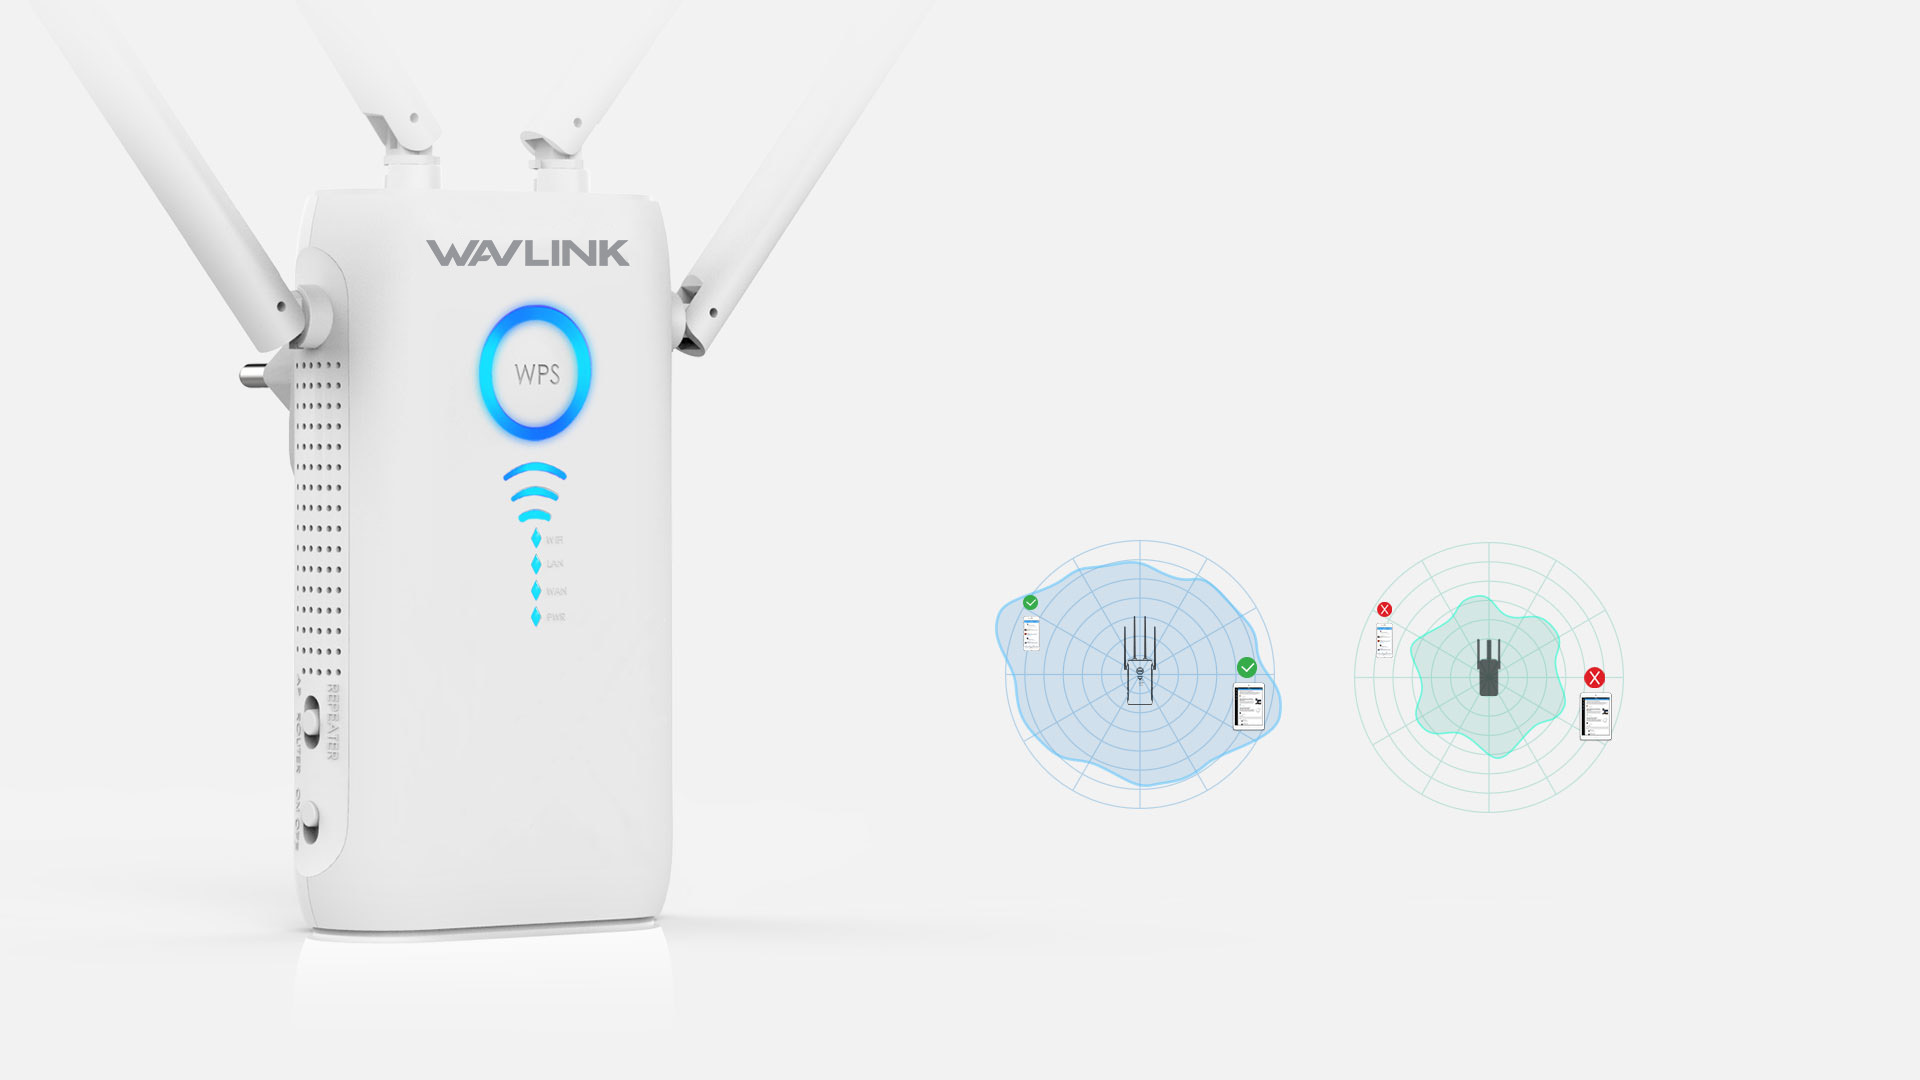 wavlink,wn579g3,1200Mbps,Reliable, beamforming_link